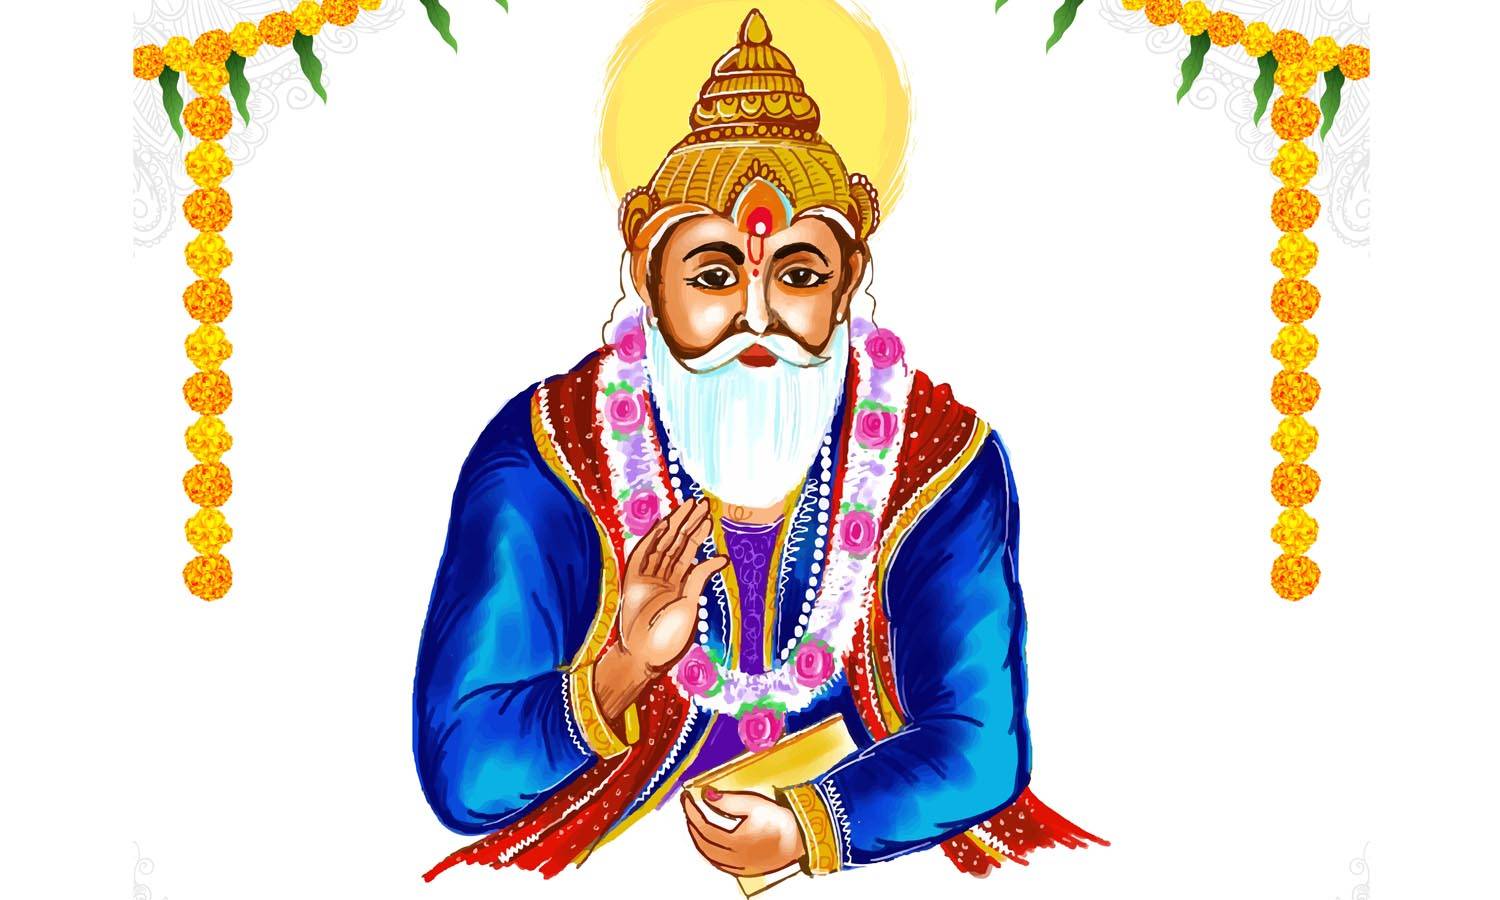 Happy Jhulelal Jayanti Messages Images